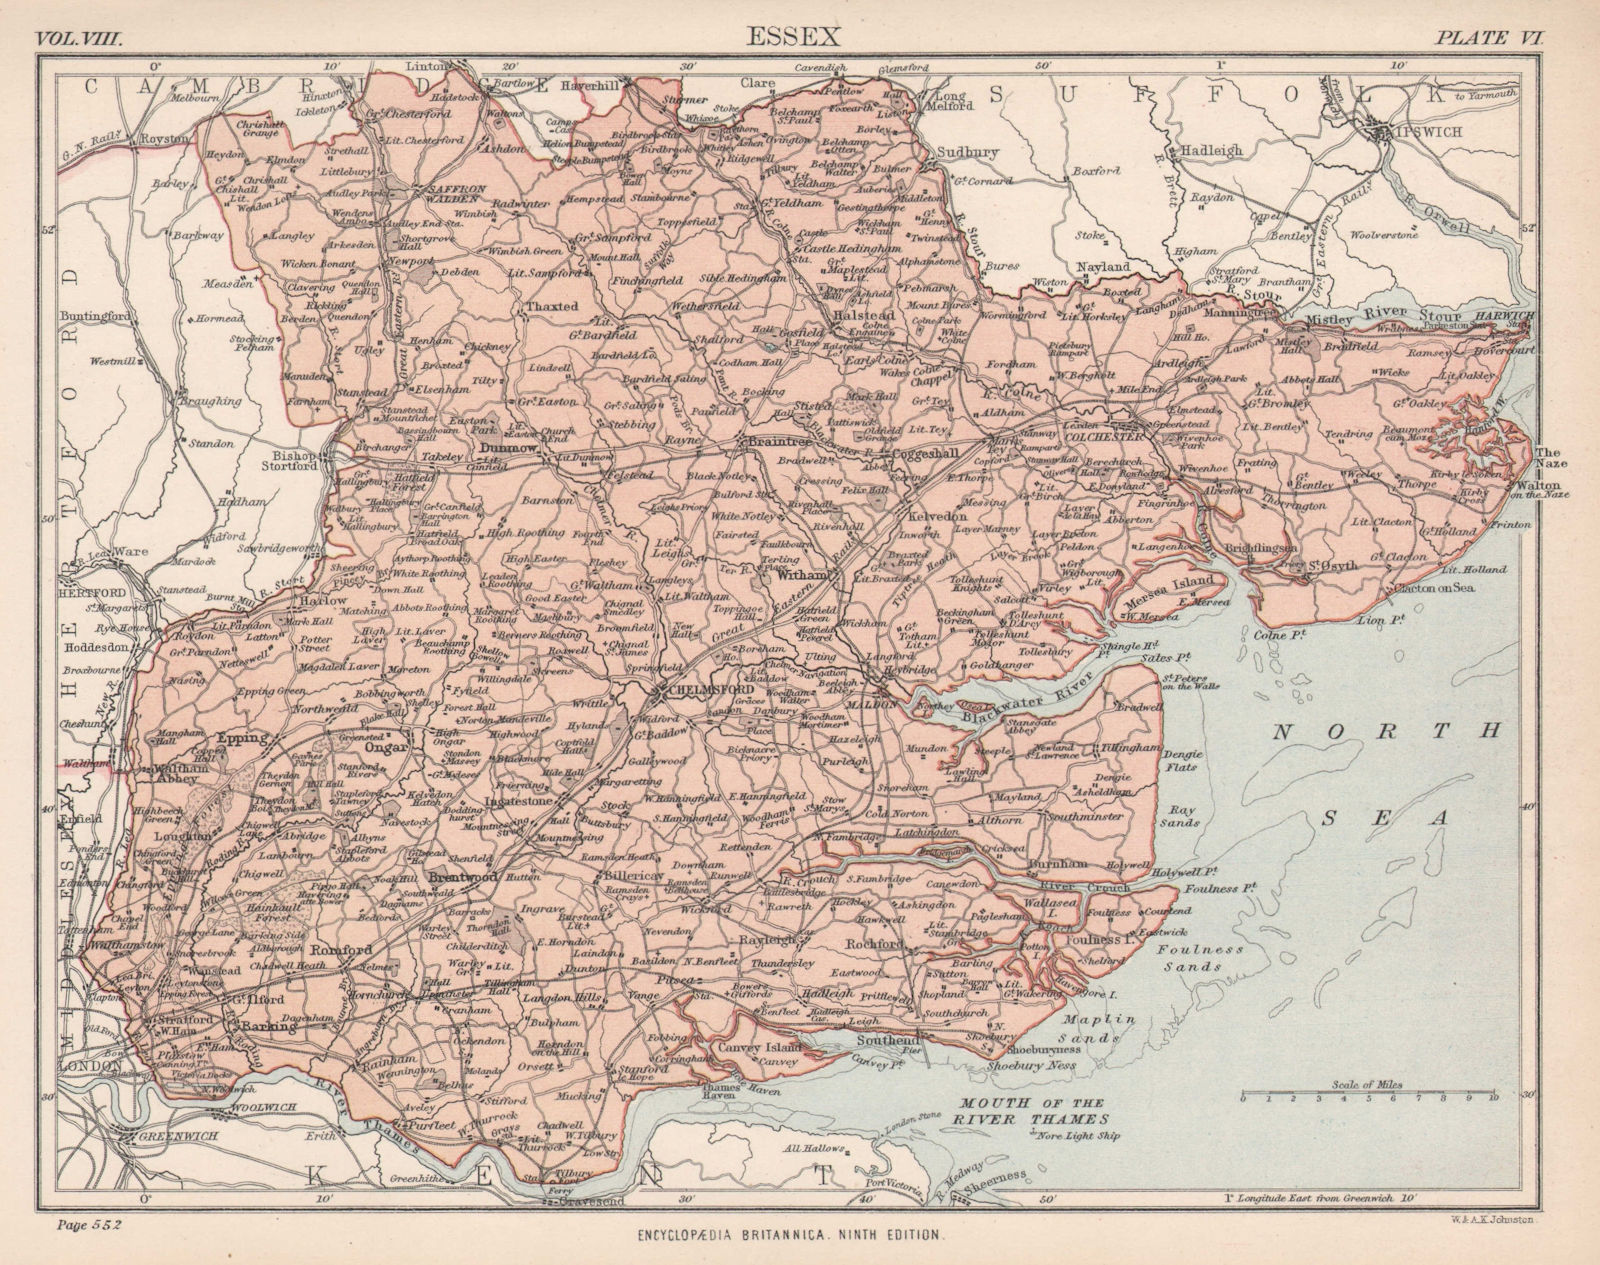 Associate Product ESSEX. County map. Thames Estuary. Britannica 9th edition 1898 old antique